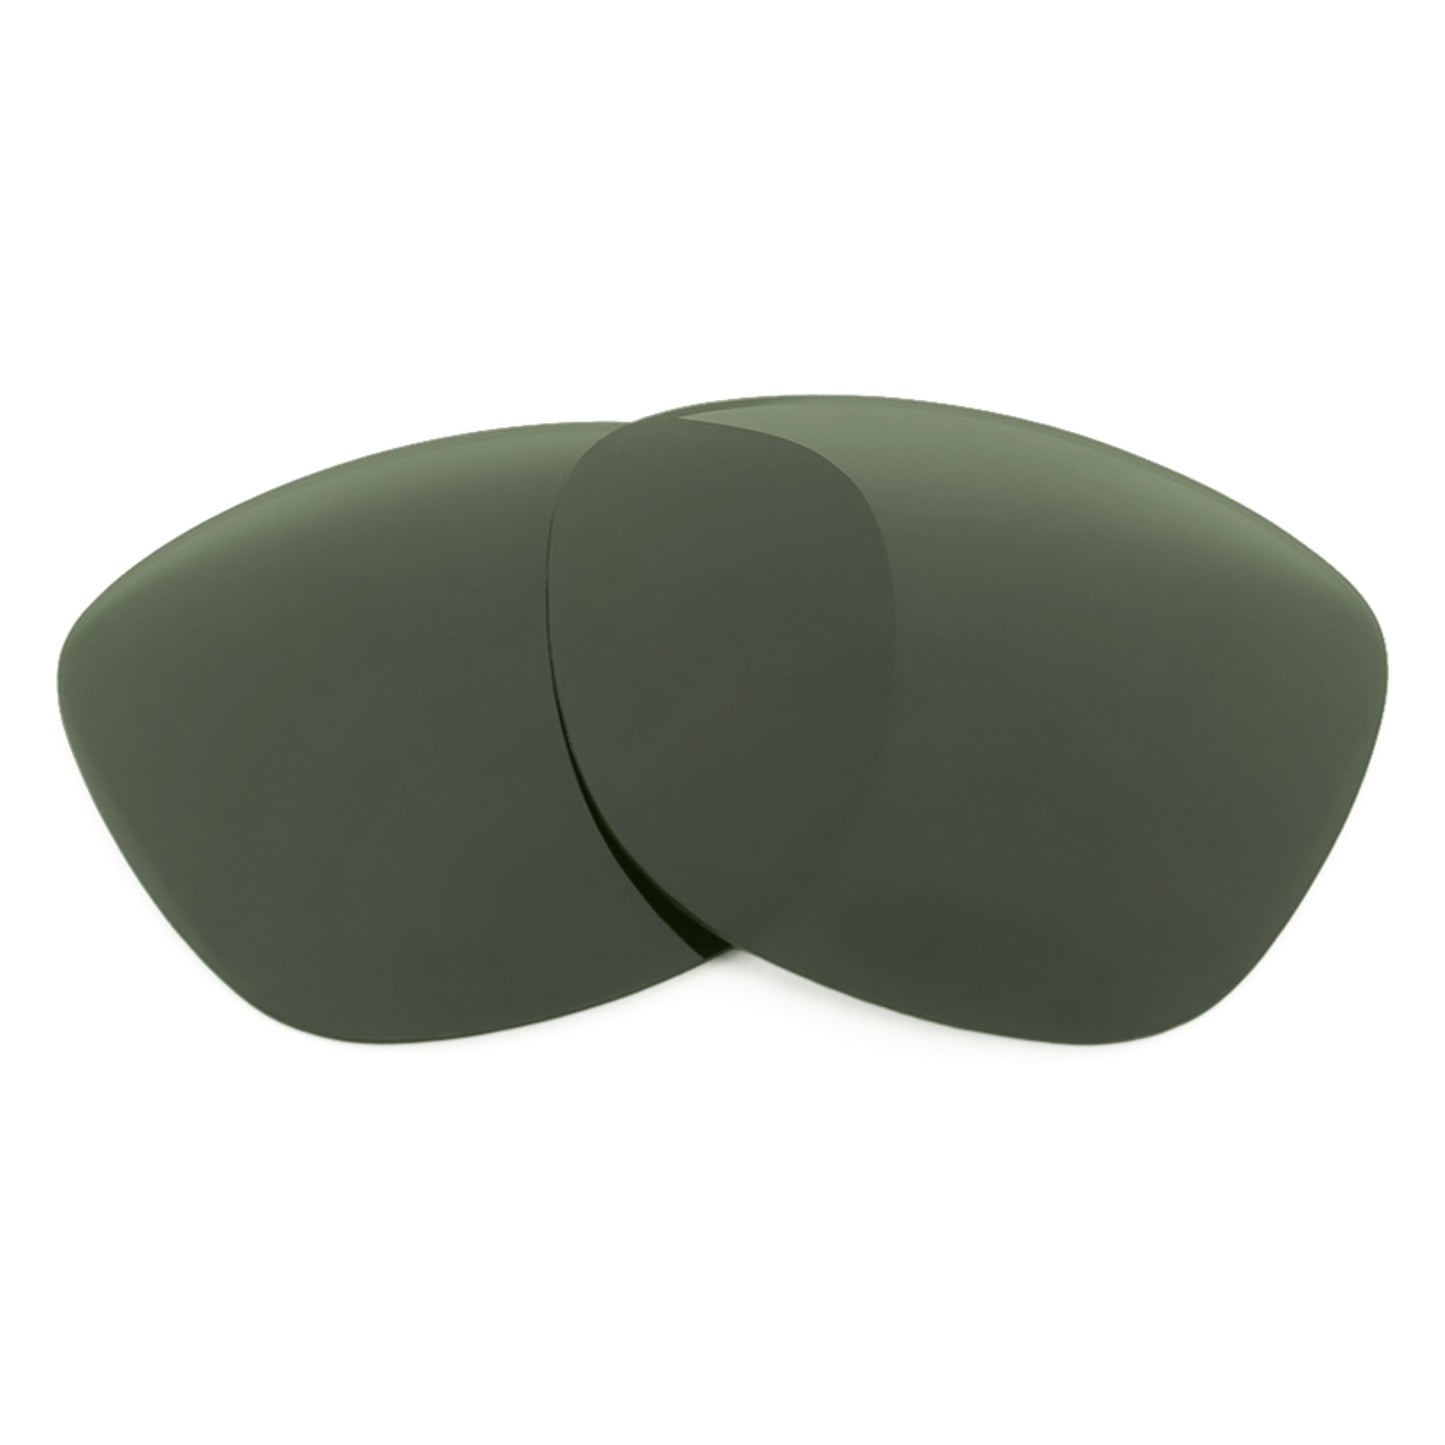 Revant replacement lenses for Ray-Ban Justin Classic RB4165 55mm Non-Polarized Gray Green